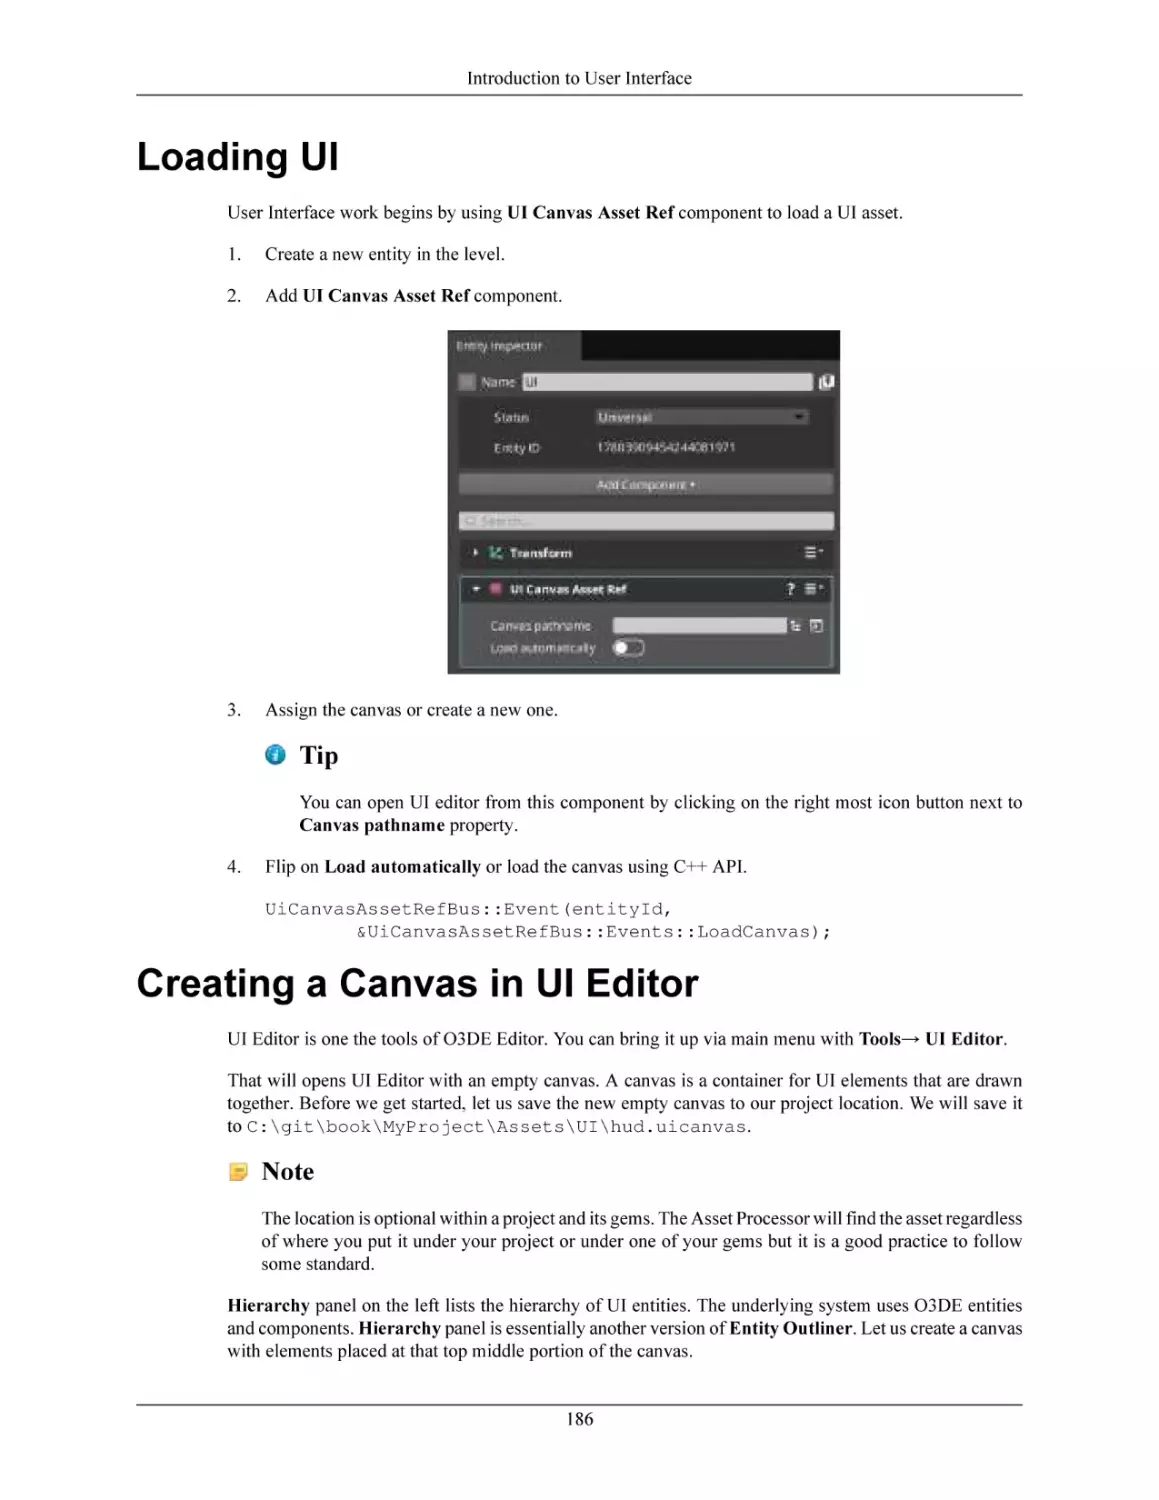 Loading UI
Creating a Canvas in UI Editor